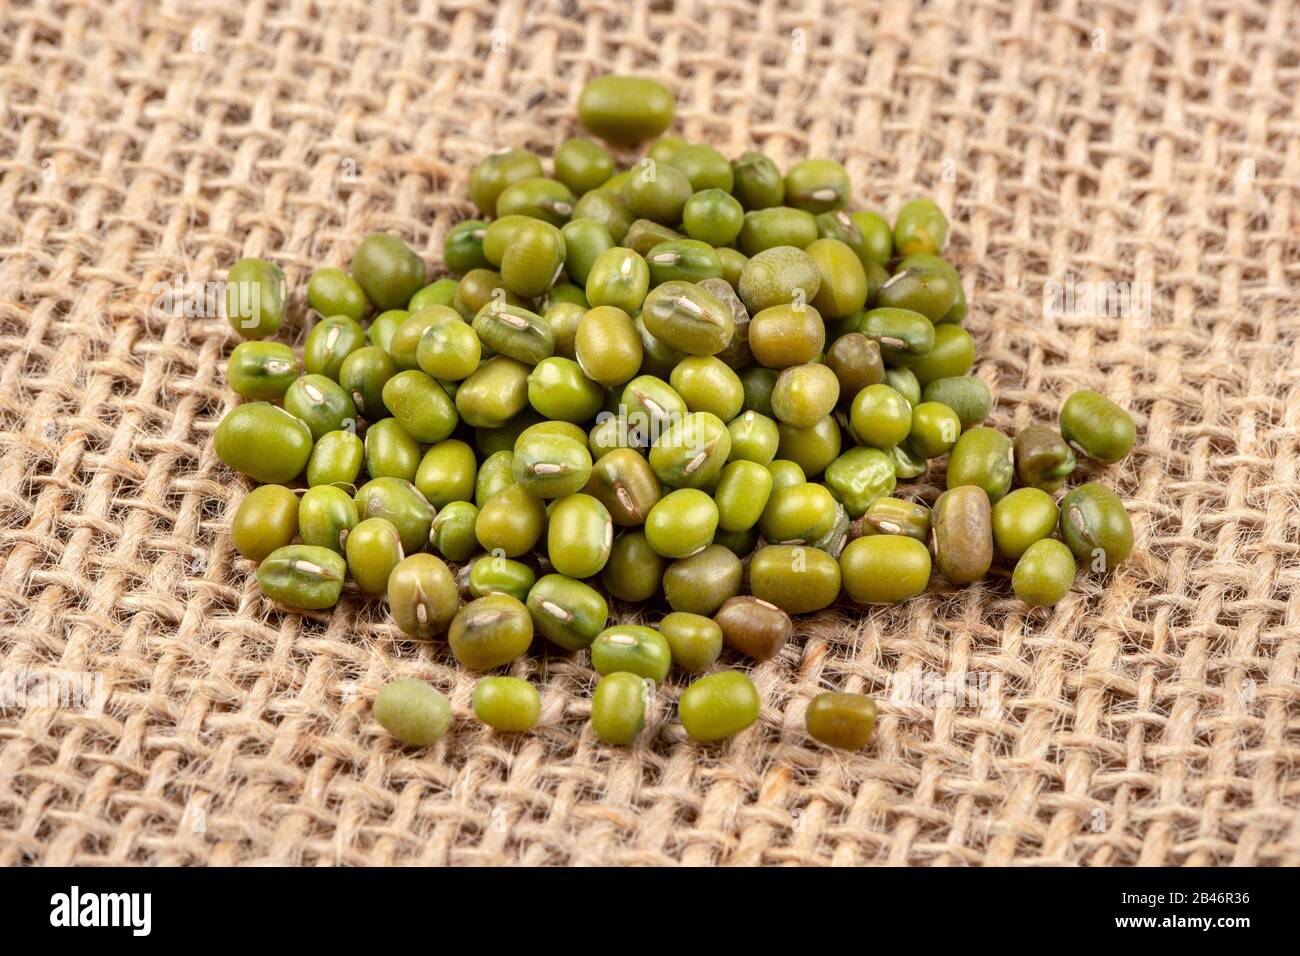 Pile of raw green mung grains scattered on burlap Stock Photo